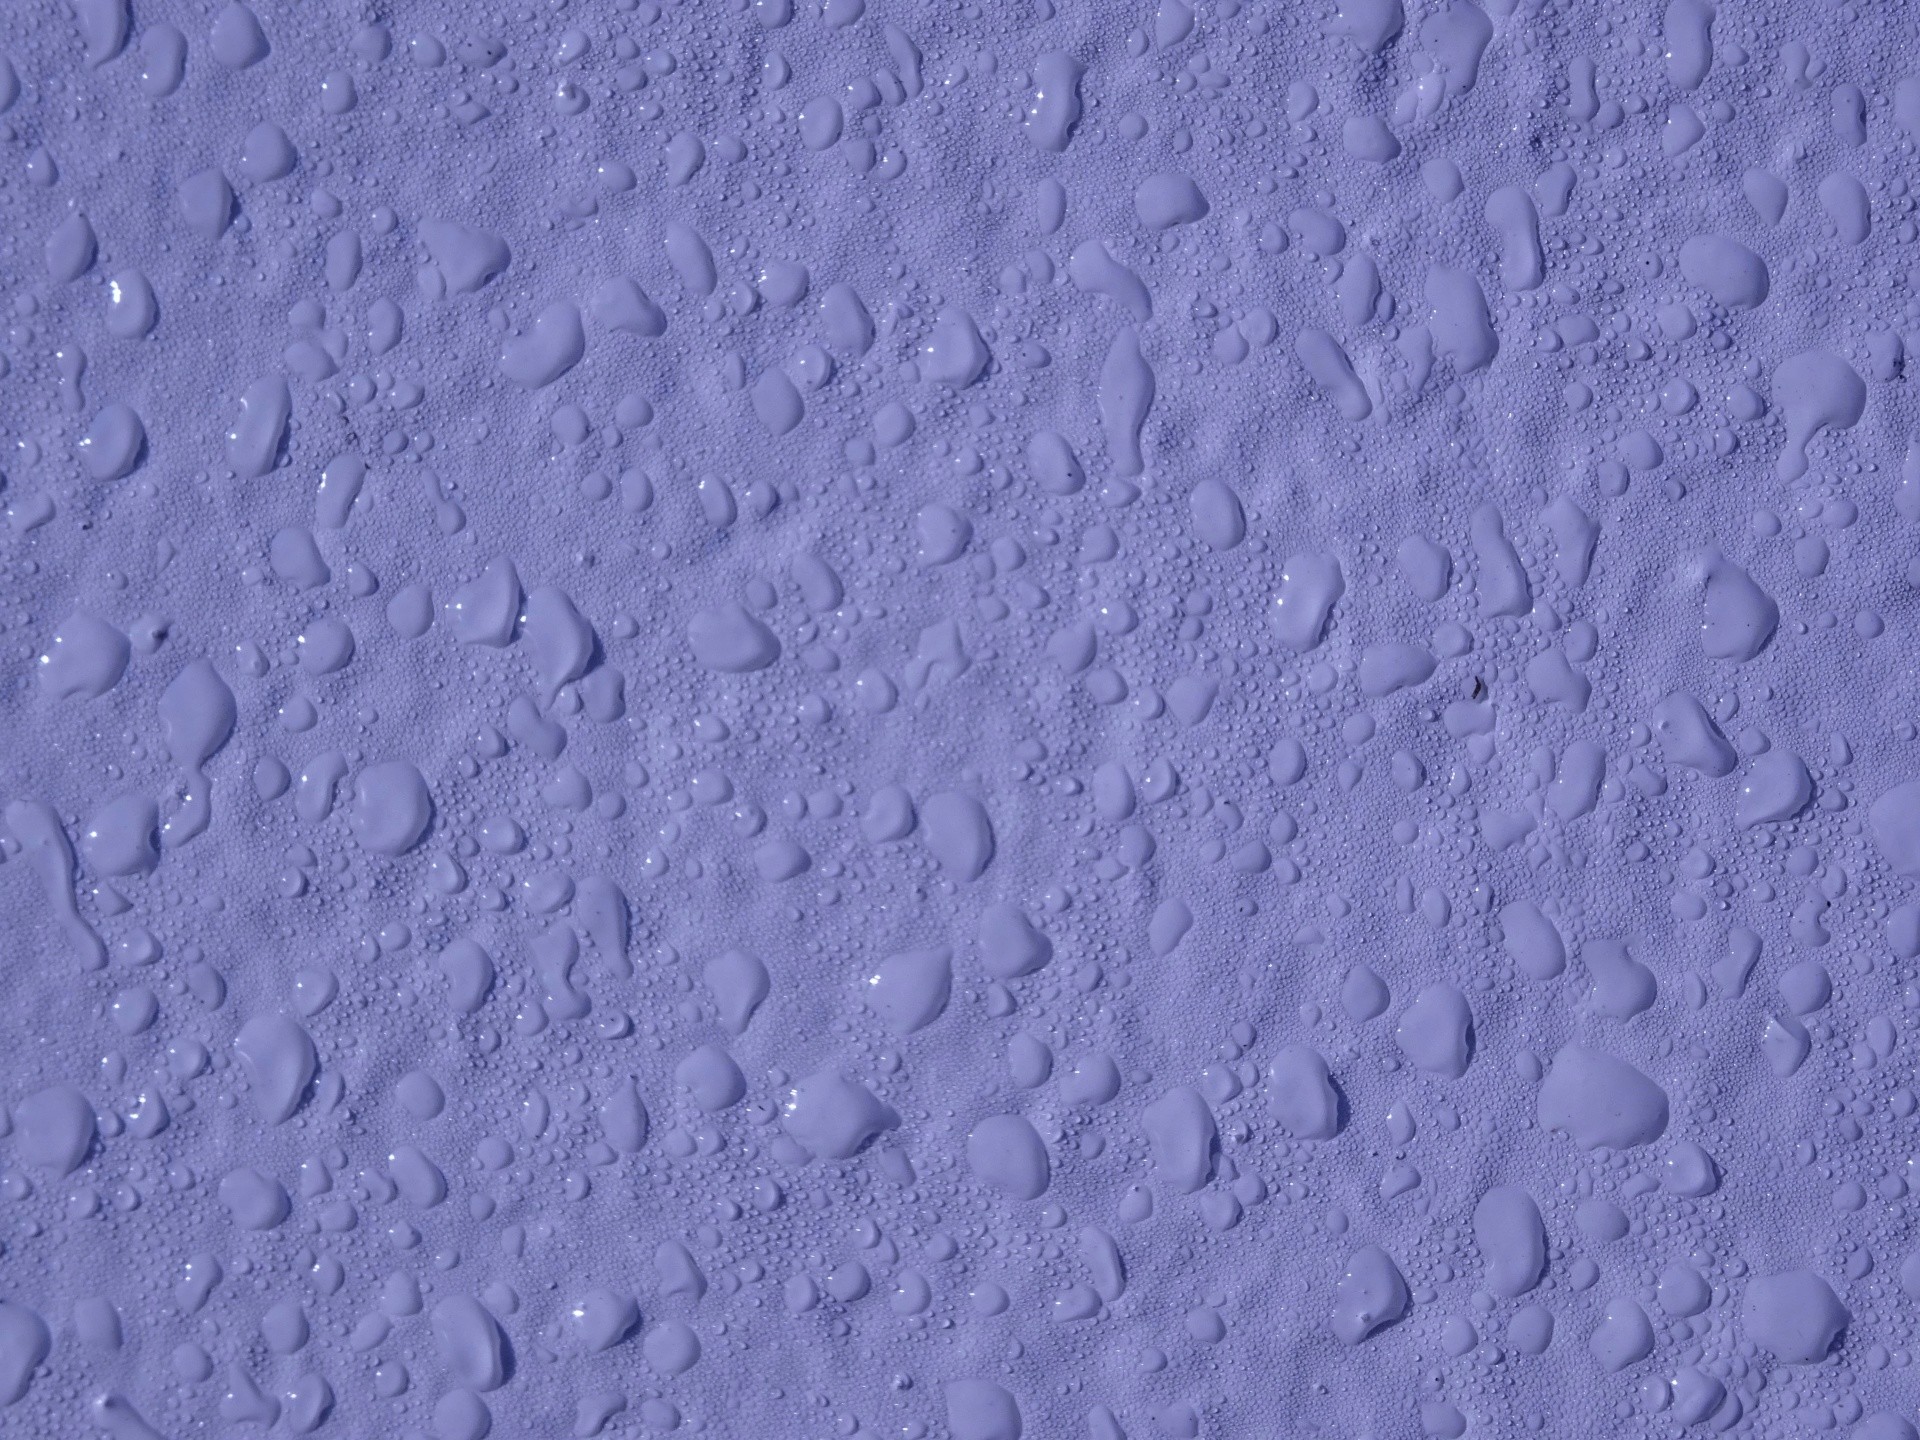 1920x1440 Lilac Water Droplets Background